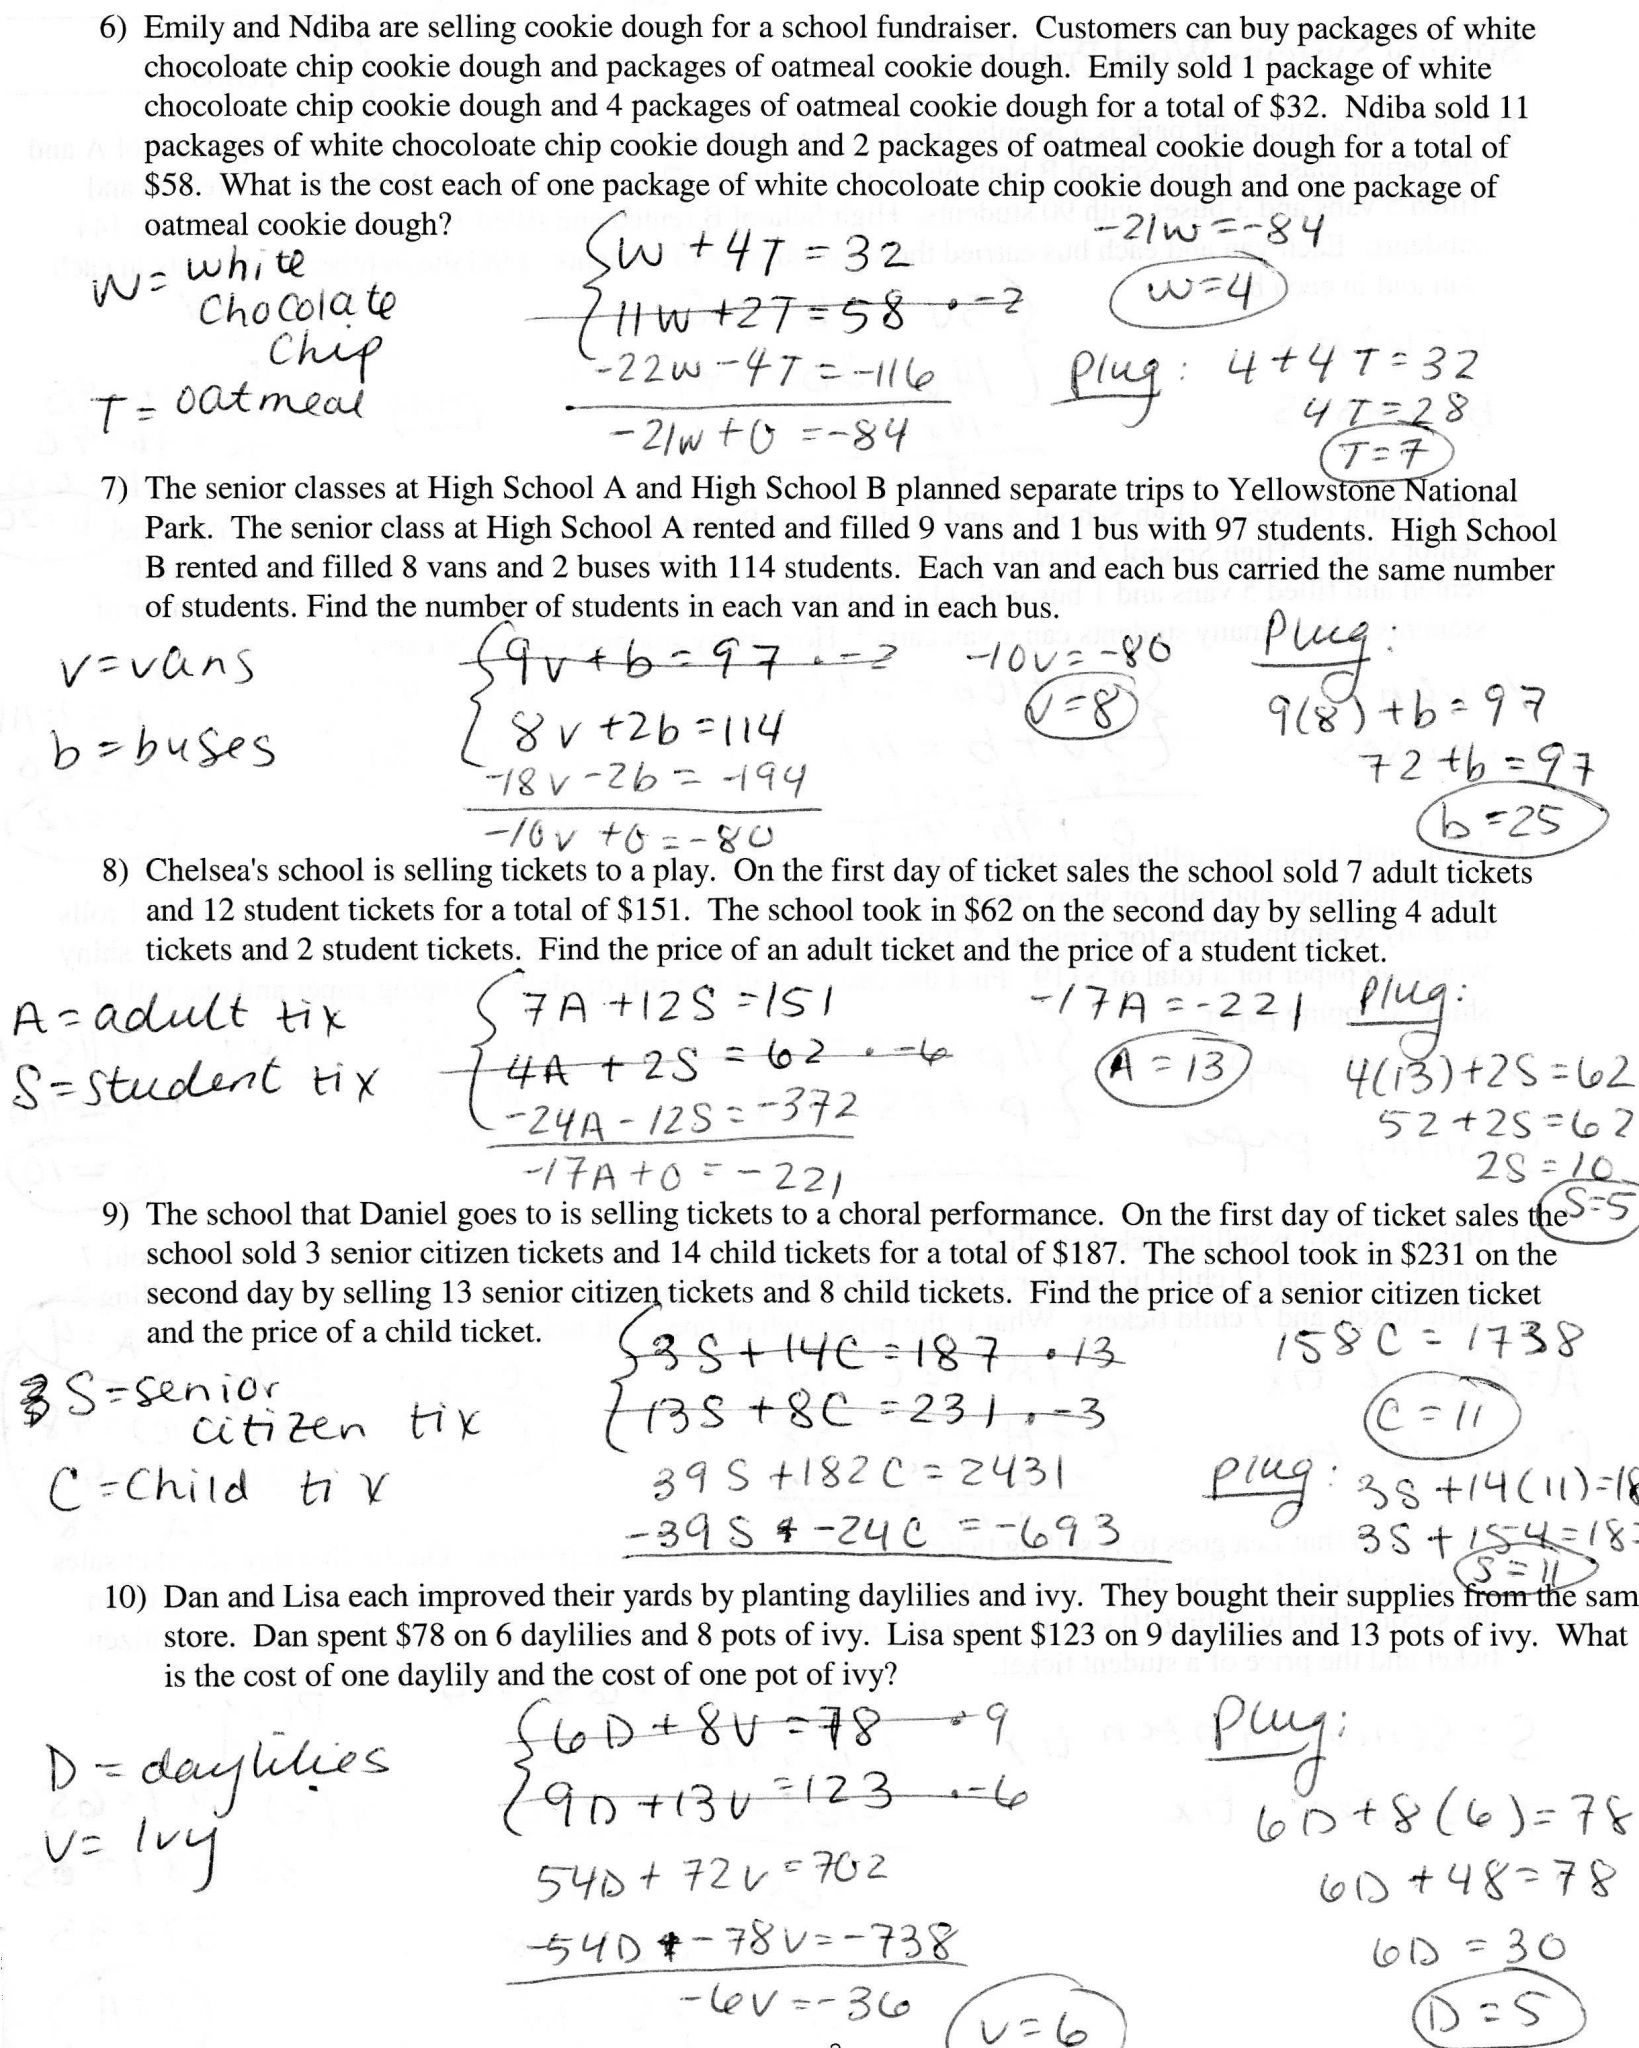 Hr Diagram Worksheet Answer Key and Geometric Sequences and Series Worksheet Answers Beautiful Worksheet